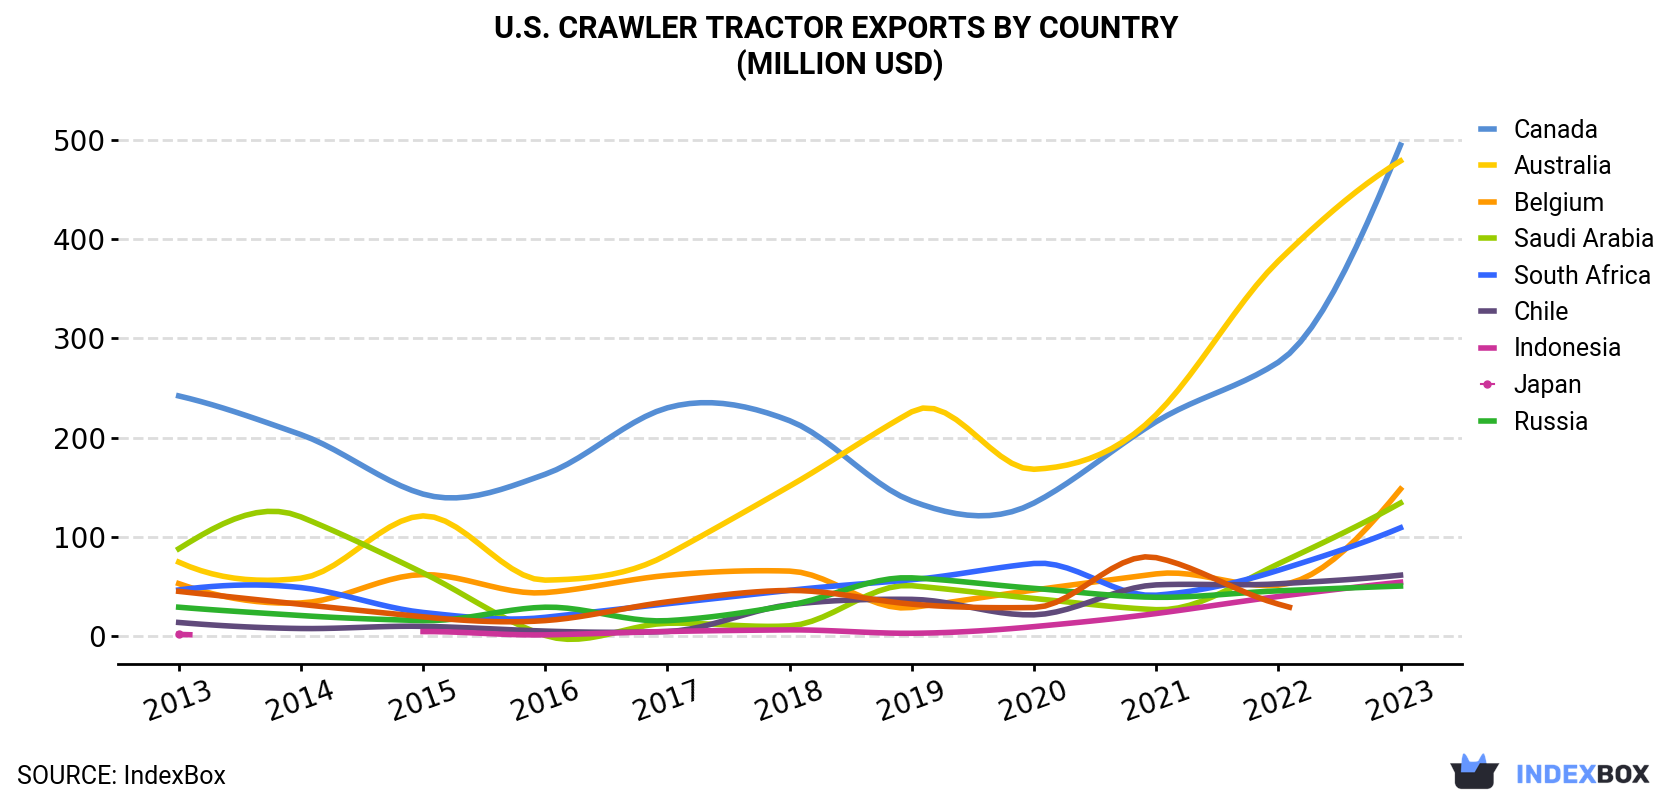 U.S. Crawler Tractor Exports By Country (Million USD)